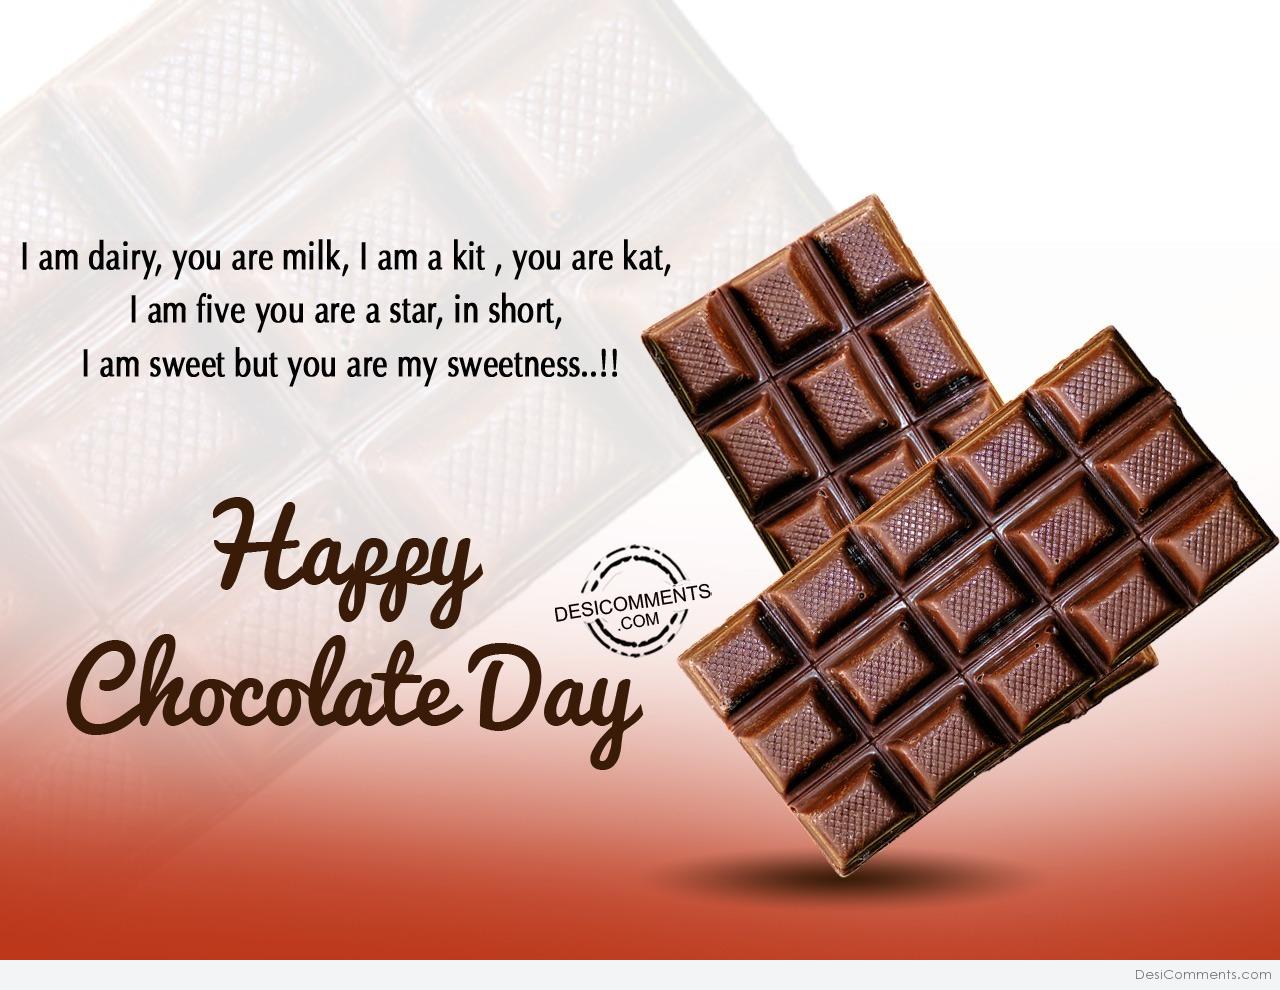 I am dairy, you are milk, Happy Chocolate Day - DesiComments.com